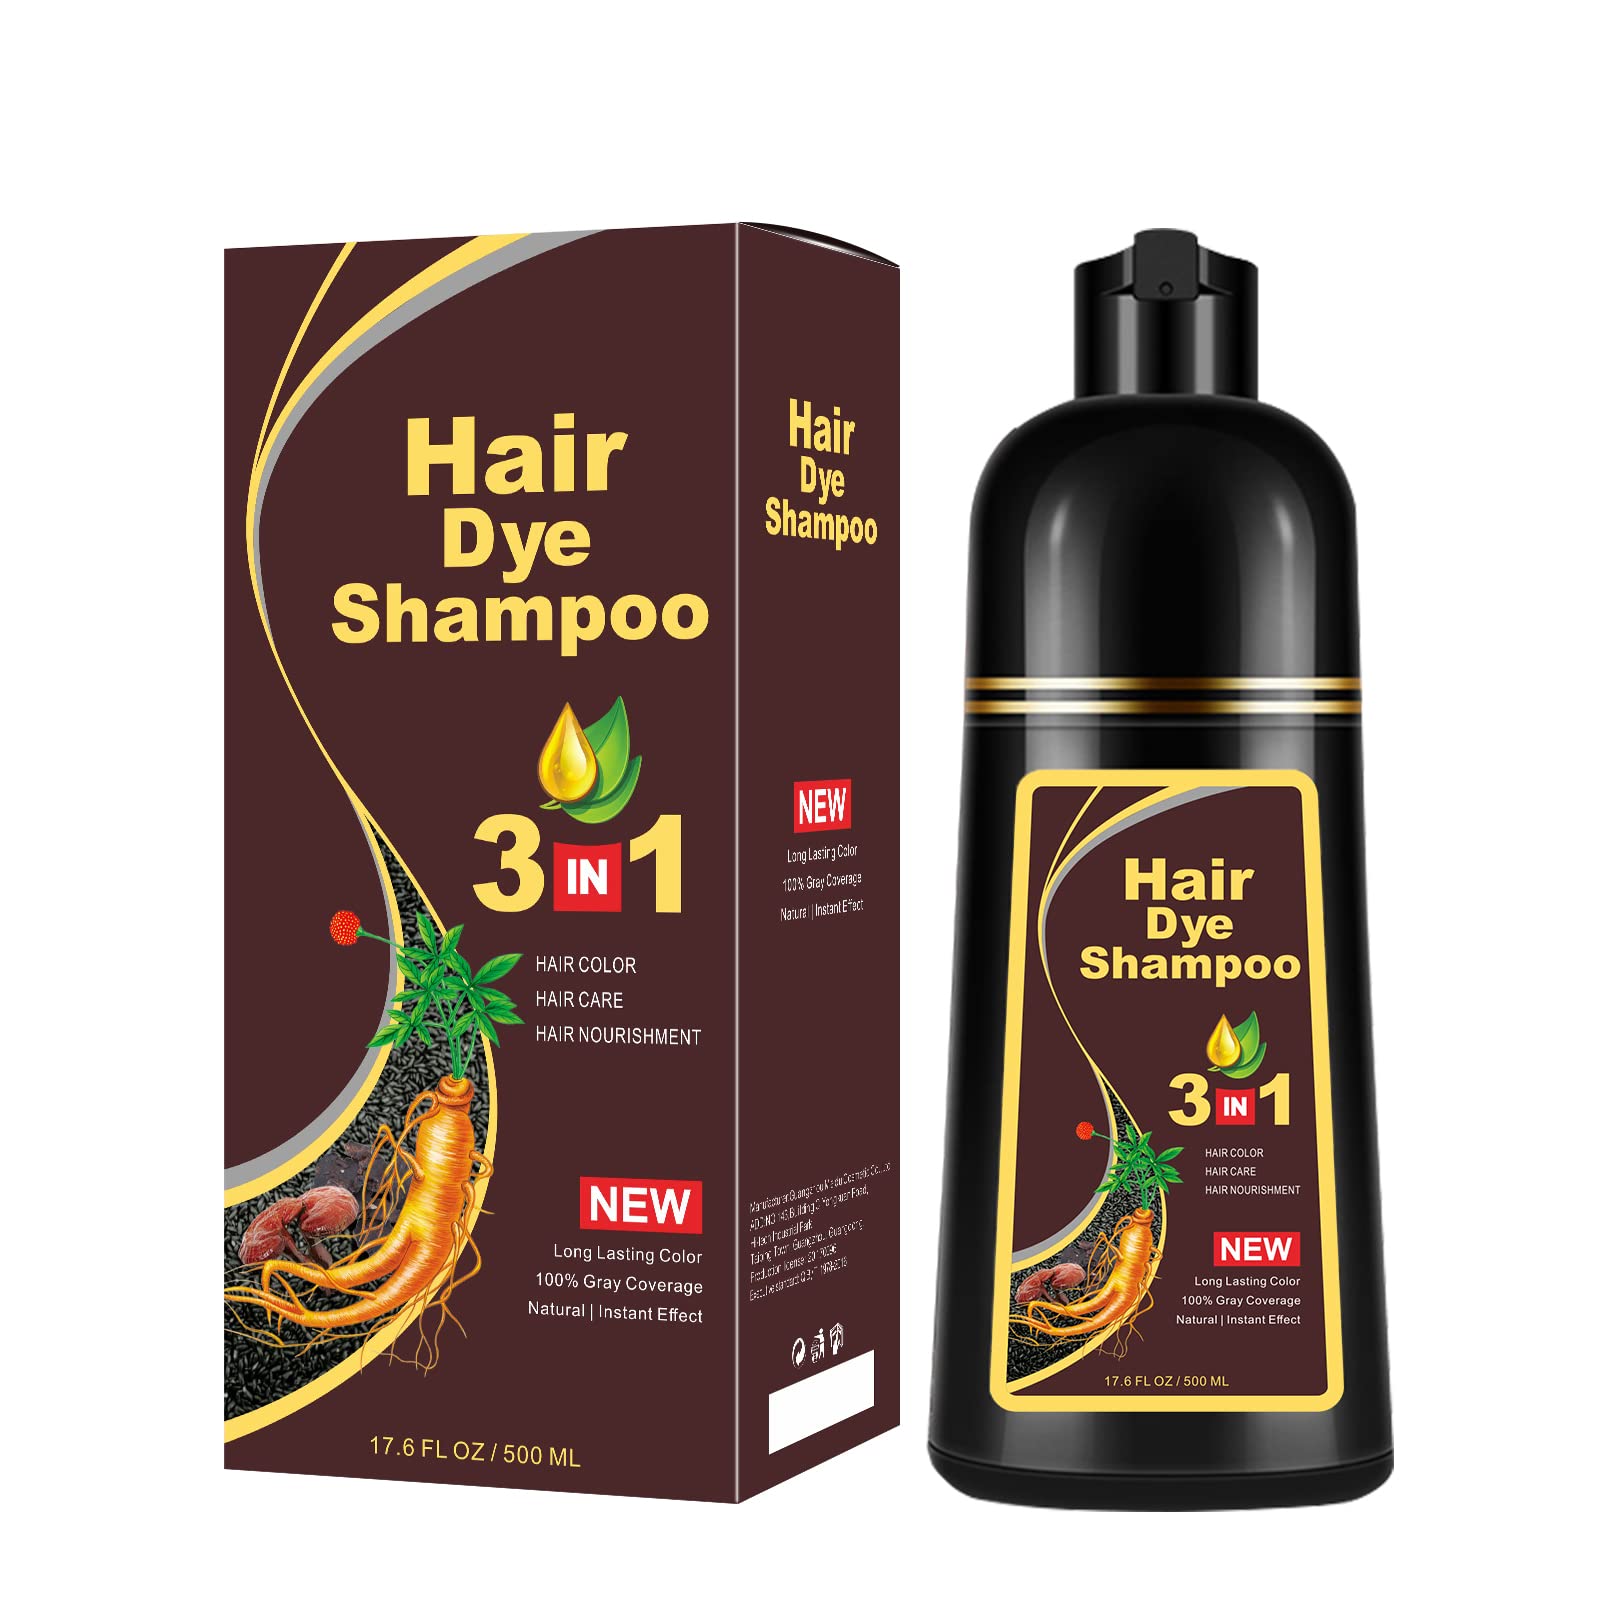 Mua Natural Coffee Hair Color Shampoo 500ml | Upgrade Formula, 3-IN-1  Herbal Hair Coloring Shampoo, Hair Nourishing & Dyeing for Men Women, 100%  Hair Color Coverage for All Hair Types  Fl